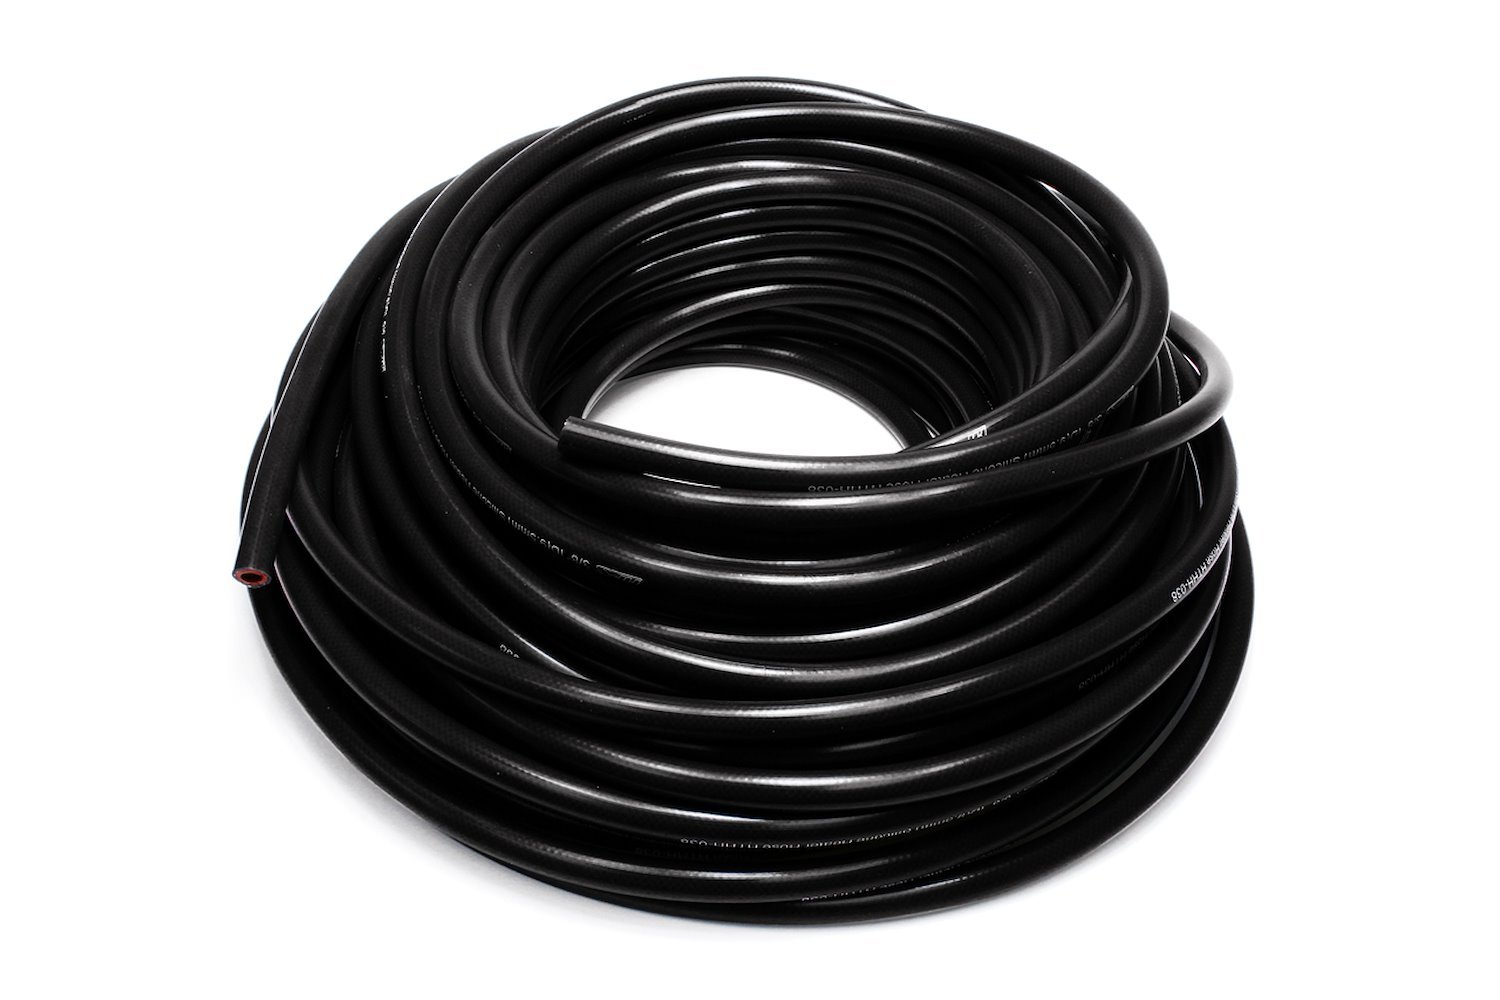 HTHH-050-BLKx100 Silicone Heater Hose Tubing, High-Temp Reinforced, 1/2 in. ID, 100 ft. Roll, Black